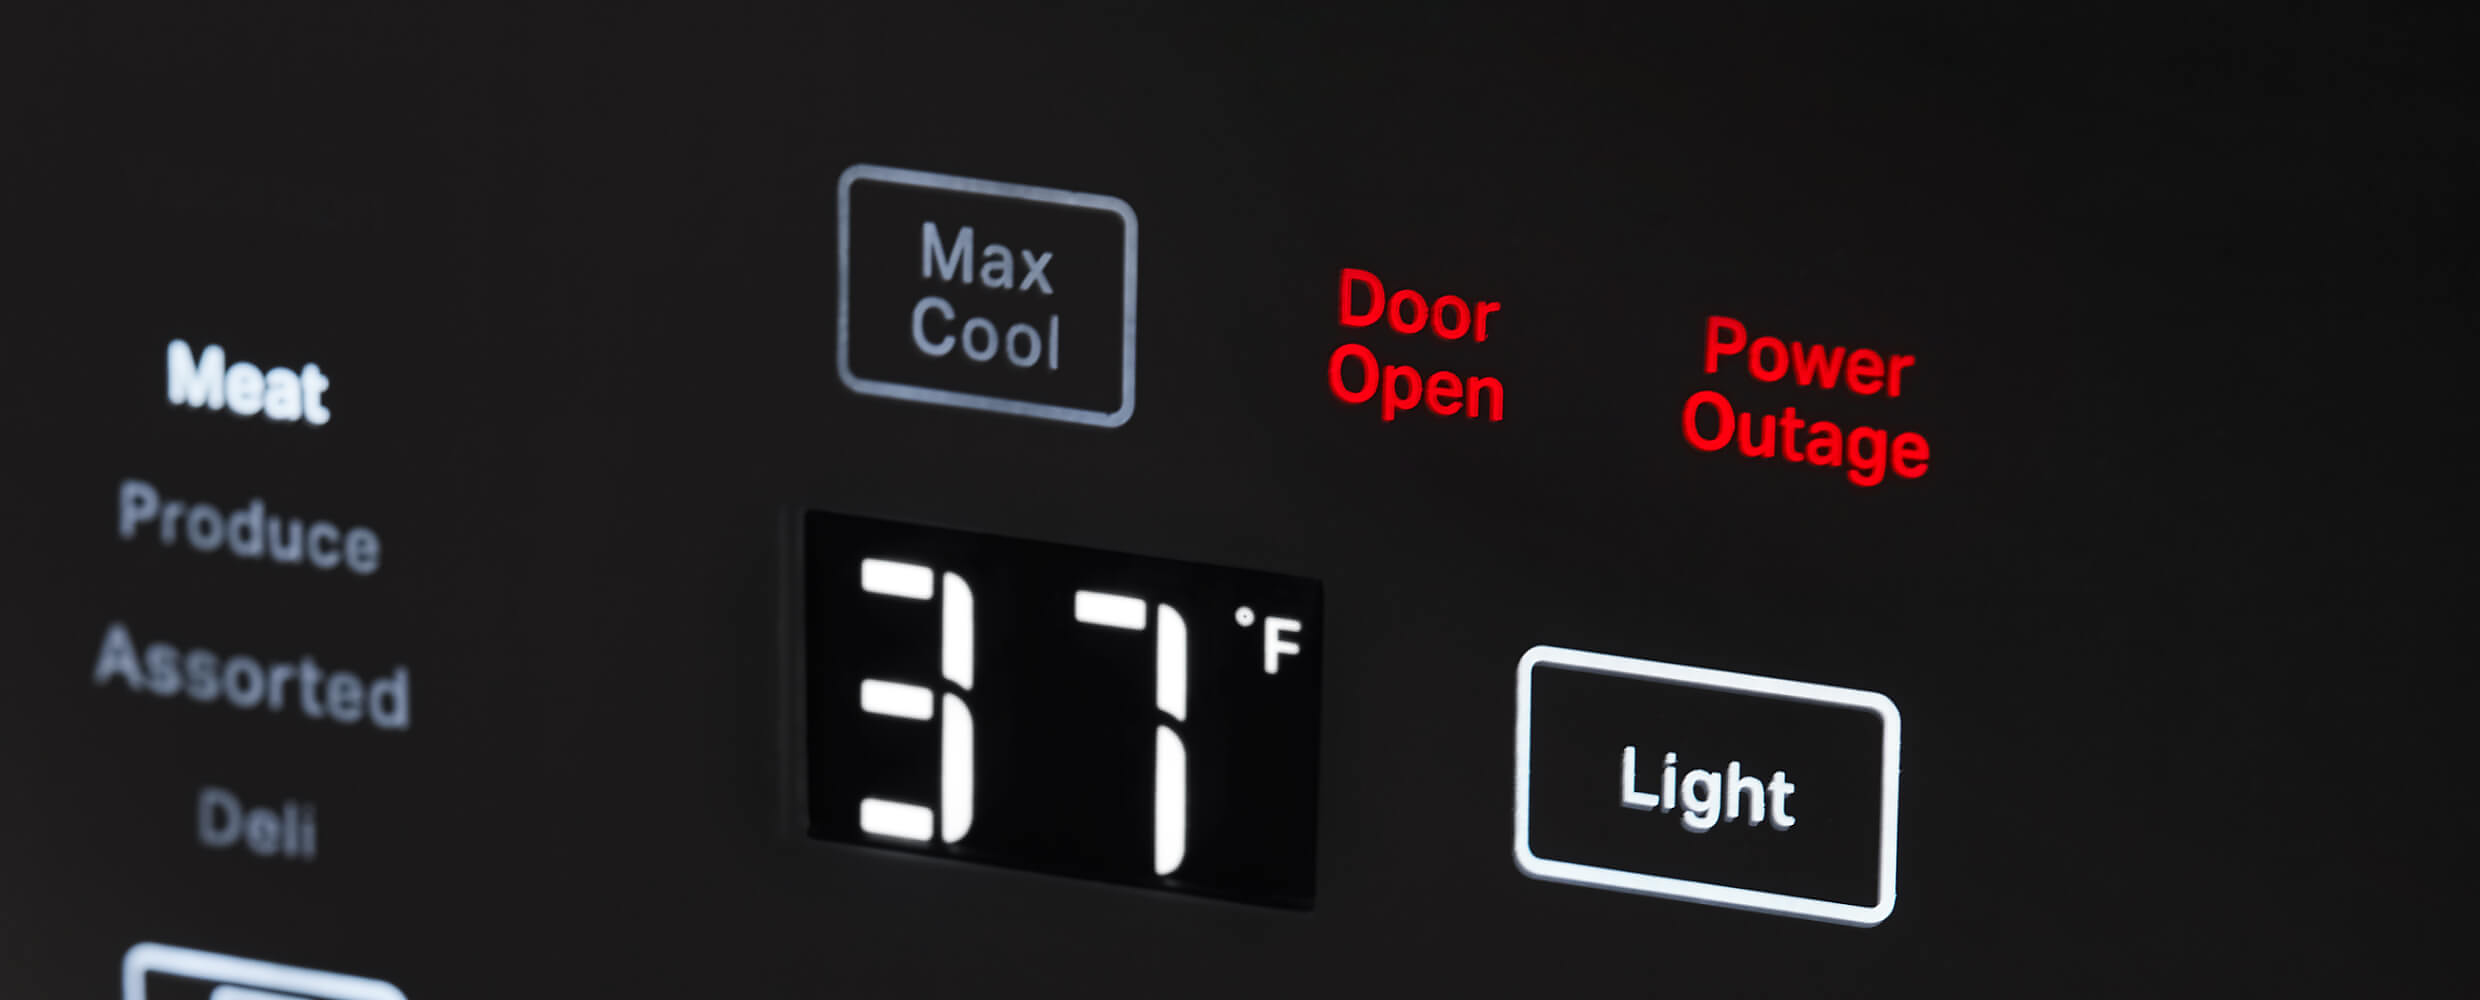 Door Open and Power Outage buttons on External Touchscreen Controls on the 36" KitchenAid® Built-In Side-by-Side Refrigerator